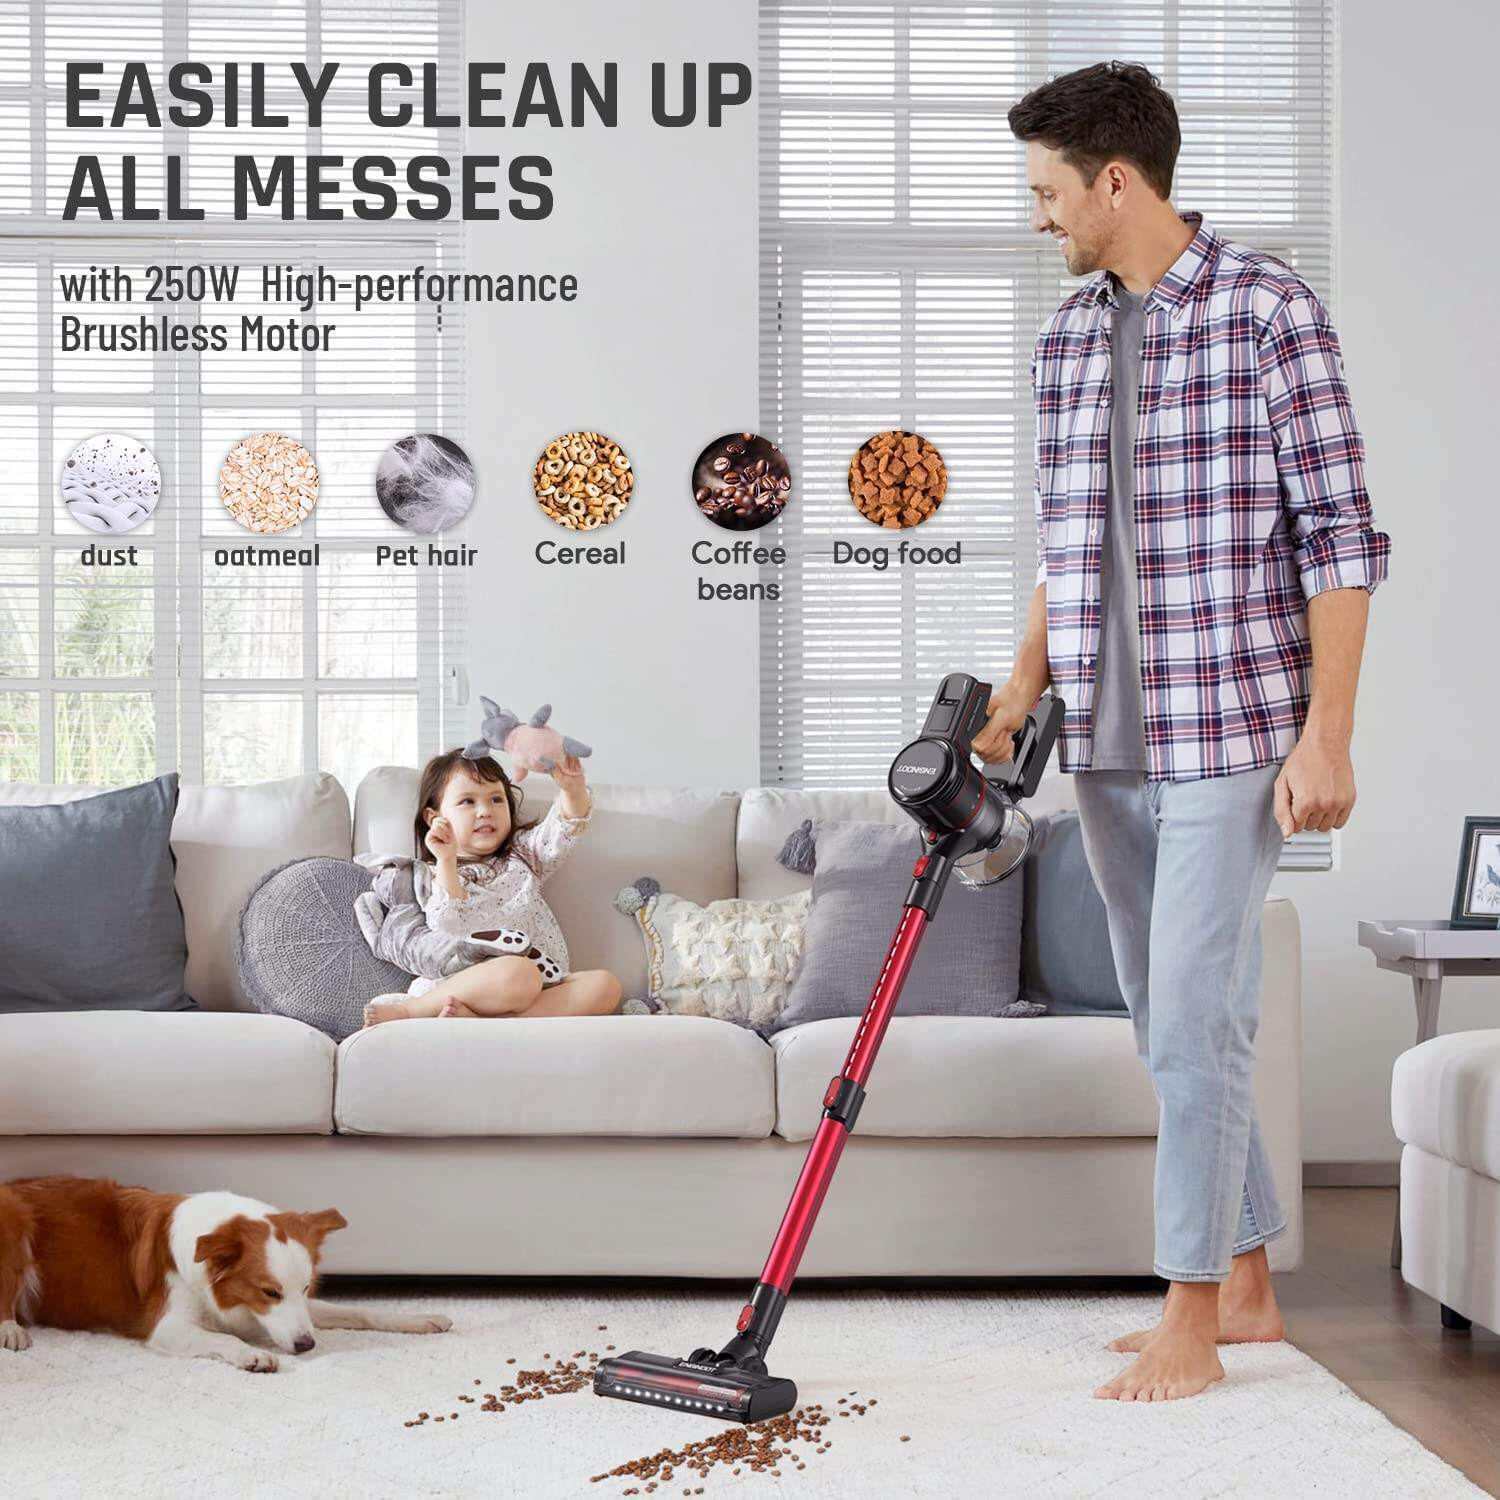 23Kpa 250W 4-in-1 Cordless Vacuum Cleaner with Advanced Cyclonic Technology